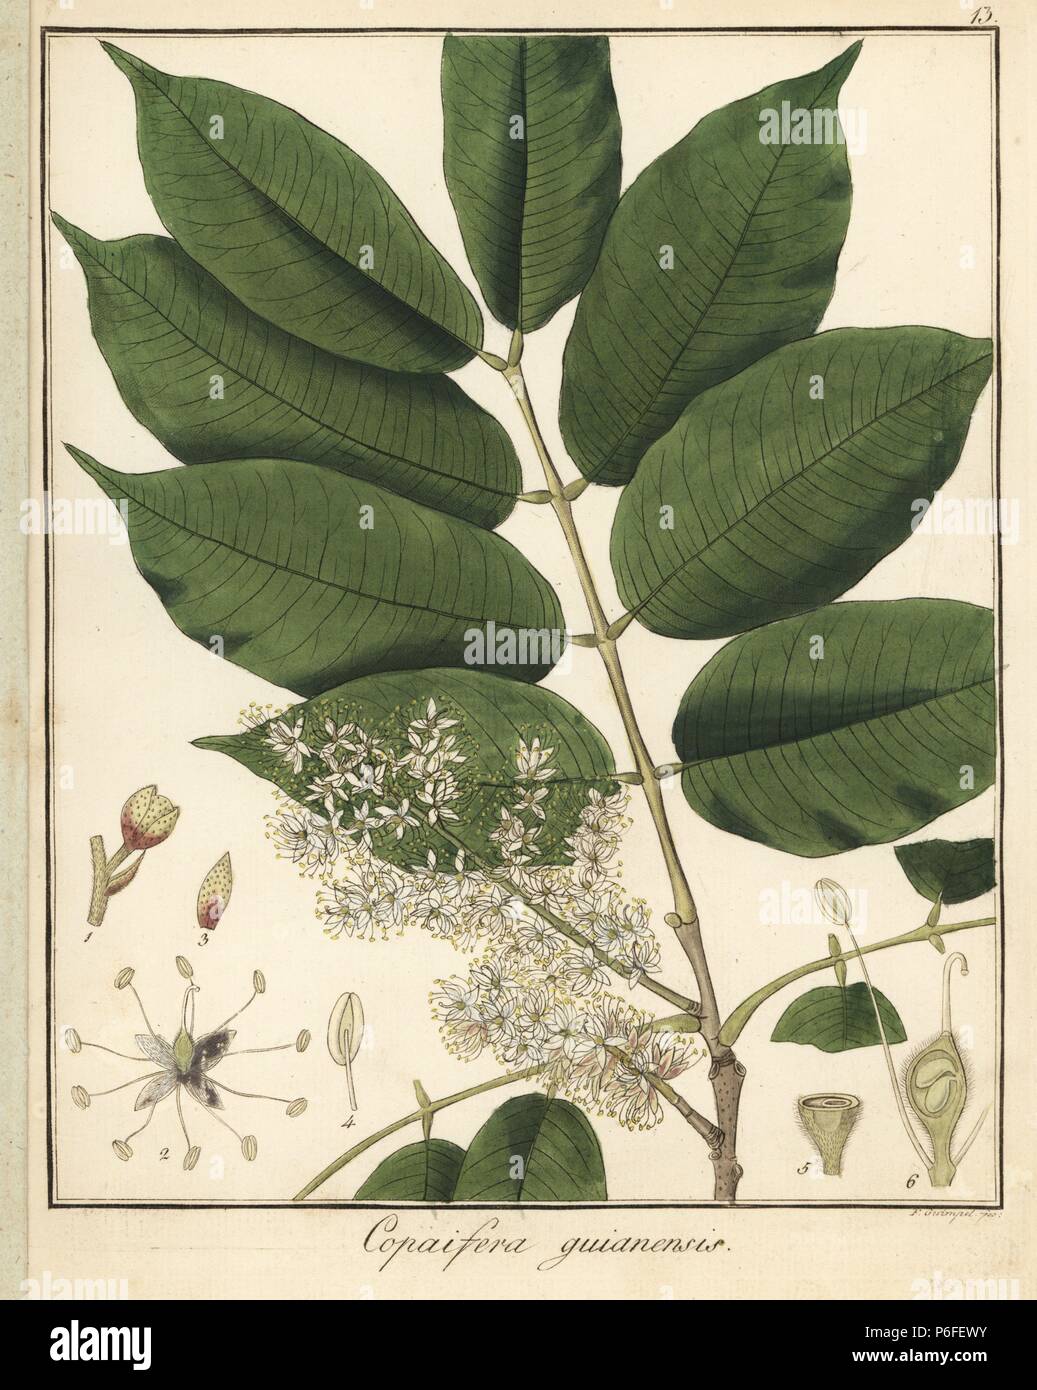 Copal or copaiba tree, Copaifera guyanensis. Handcoloured copperplate engraving by F. Guimpel from Dr. Friedrich Gottlob Hayne's Medical Botany, Berlin, 1822. Hayne (1763-1832) was a German botanist, apothecary and professor of pharmaceutical botany at Berlin University. Stock Photo